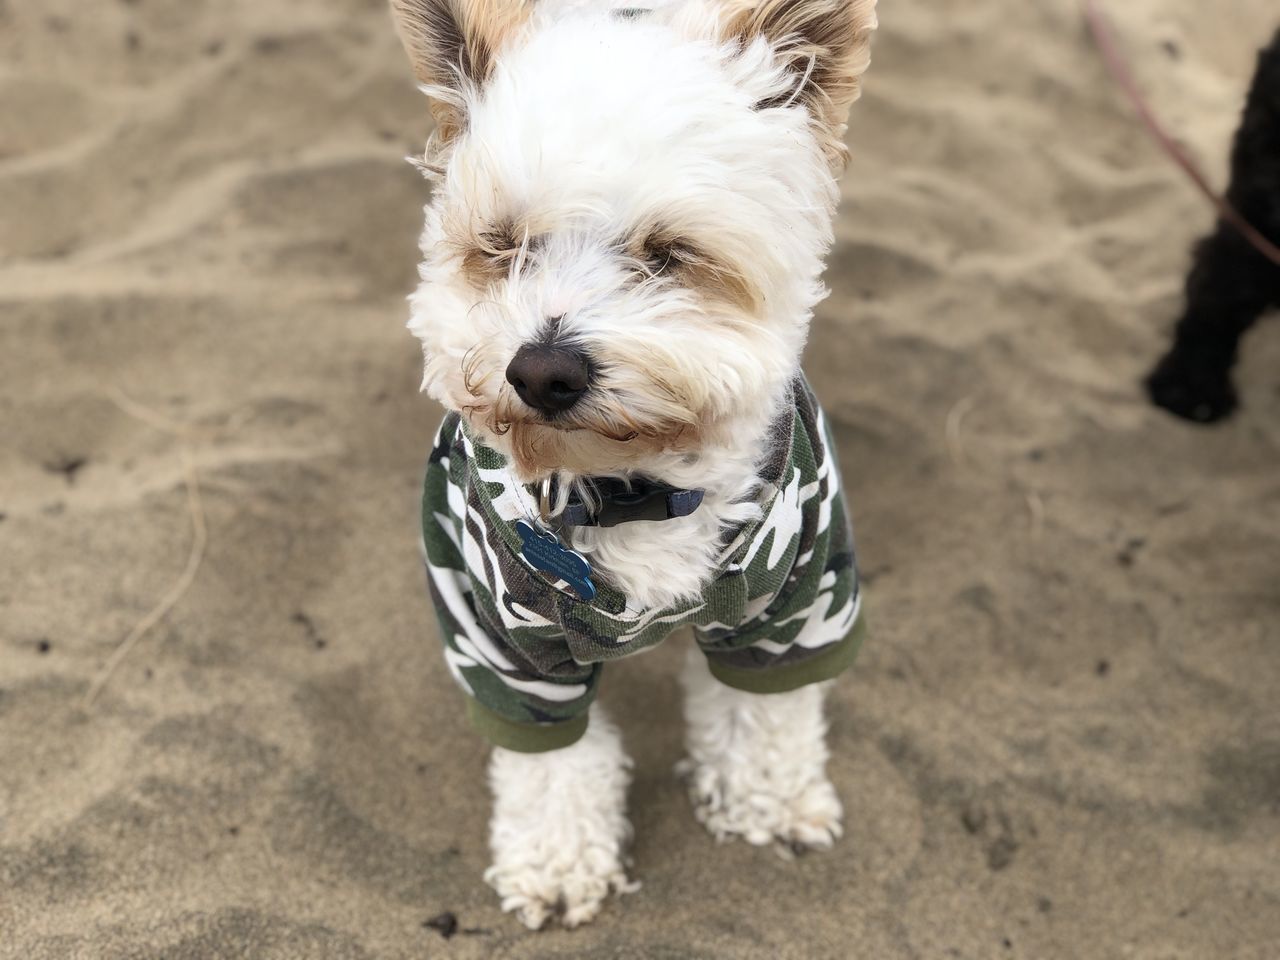 domestic animals, pet, dog, canine, animal themes, one animal, animal, mammal, sand, lap dog, beach, land, white, cute, west highland white terrier, young animal, puppy, nature, terrier, fun, portrait, running